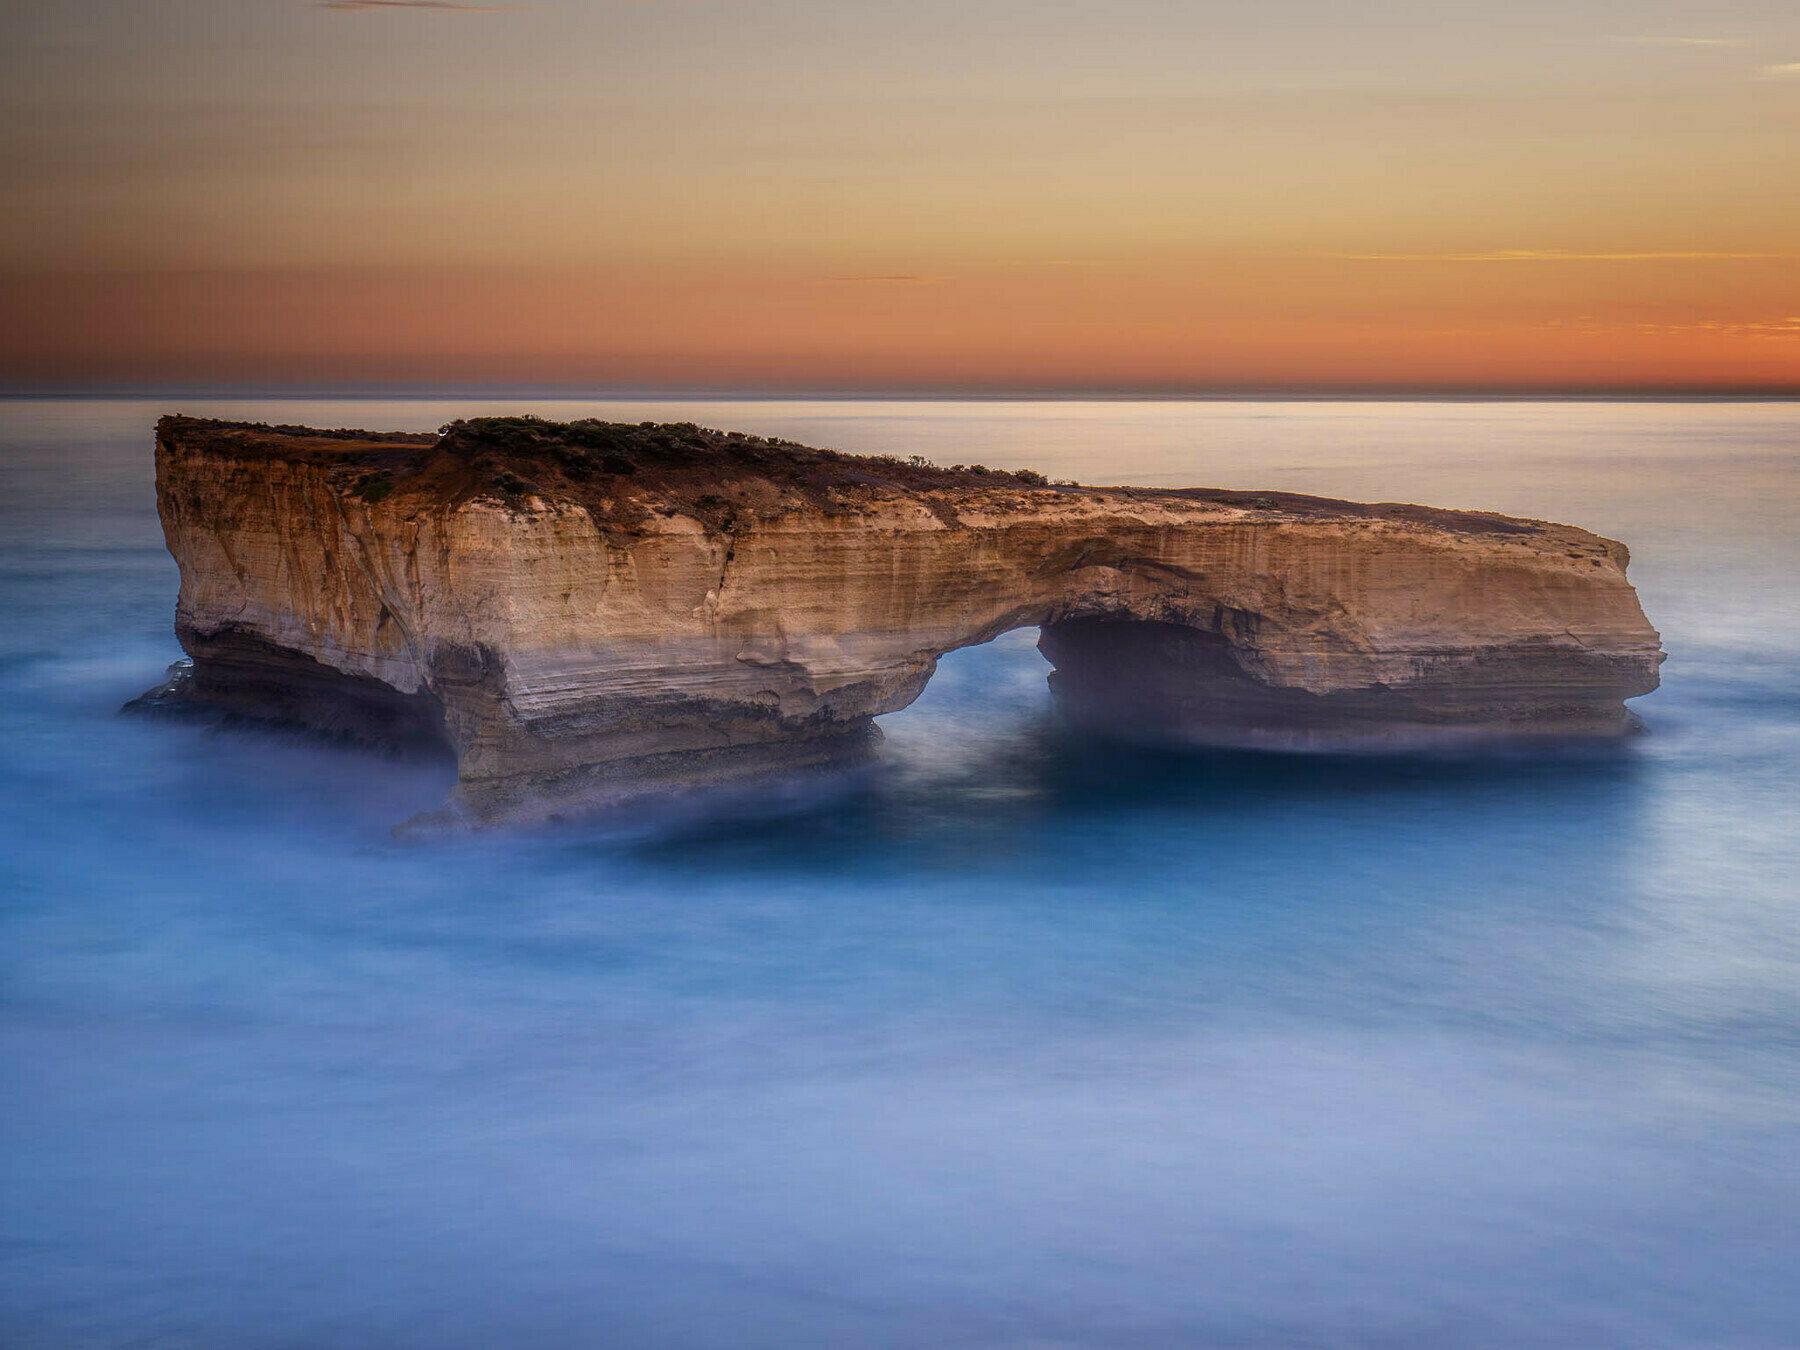 Sunset image of London Arch, a wonderful sea stack along the Great Ocean Road in Victoria, Australai